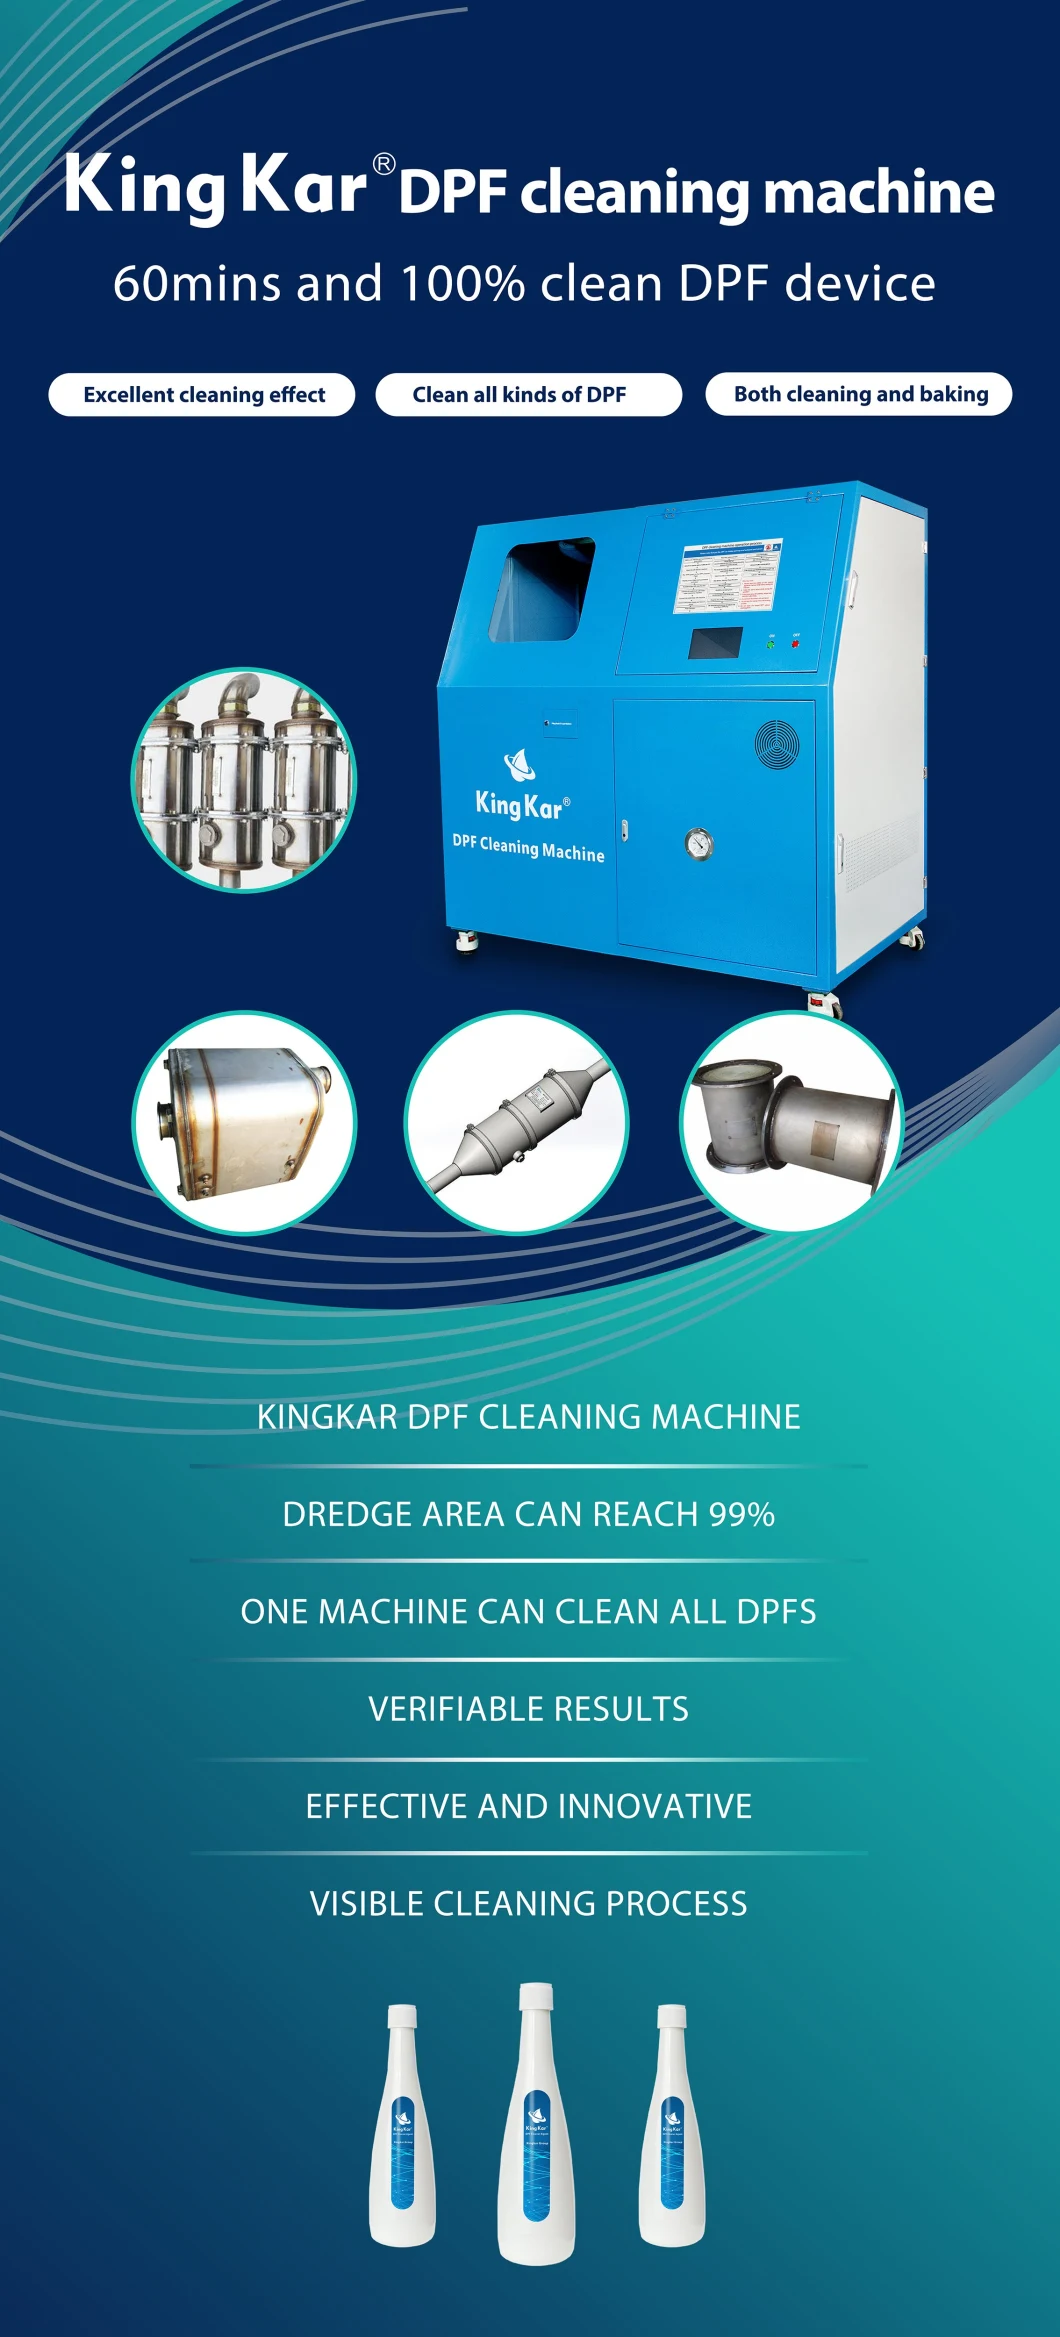 Ultrasonic Washing DPF Cleaning Machine Diesel Particulate Filter Cleaner DPF